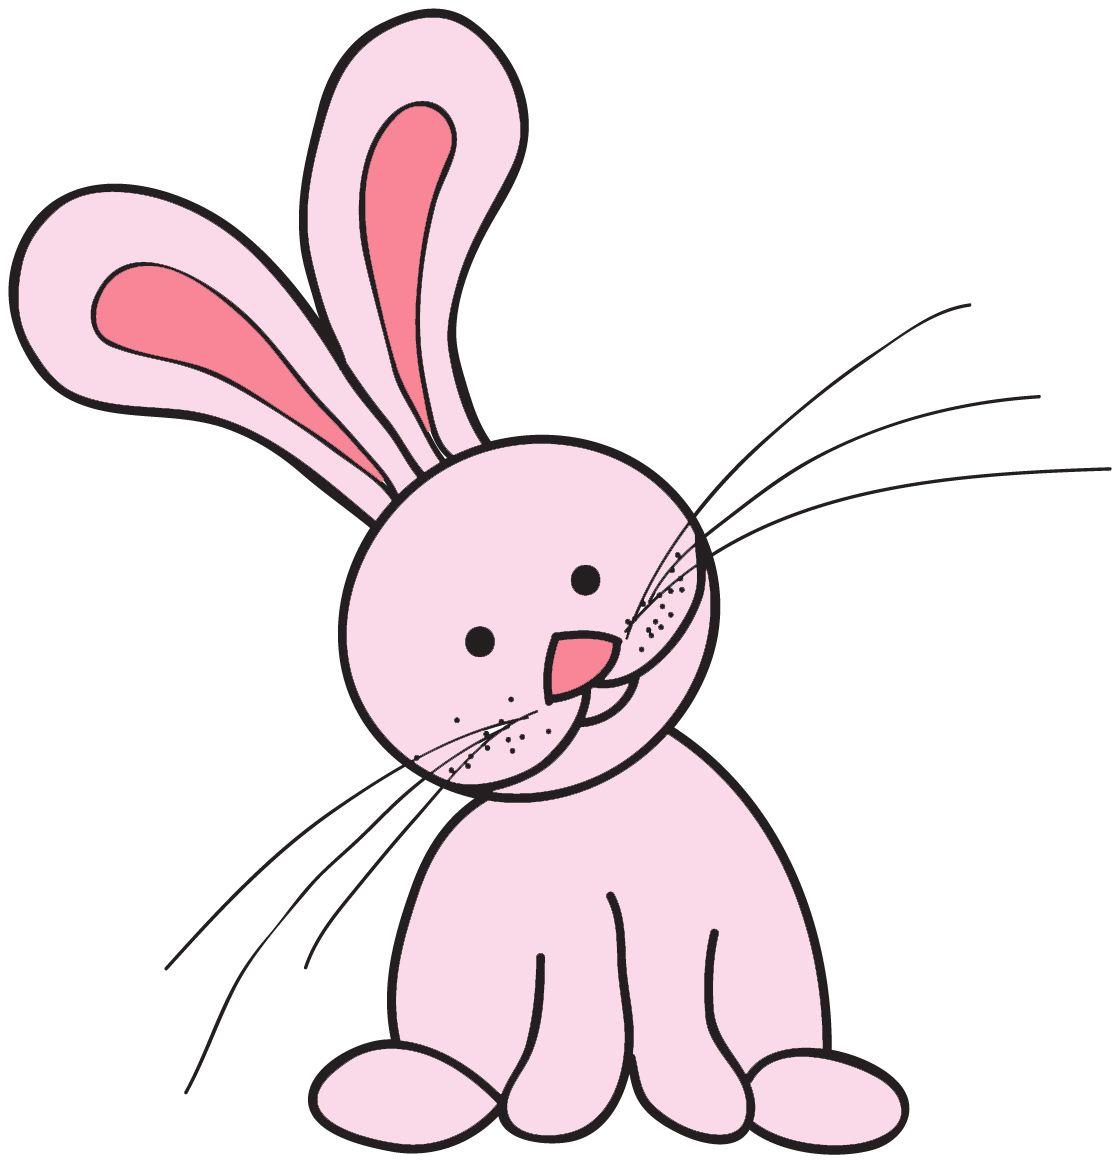 Free Image Of Cartoon Bunnies, Download Free Image Of Cartoon Bunnies png image, Free ClipArts on Clipart Library